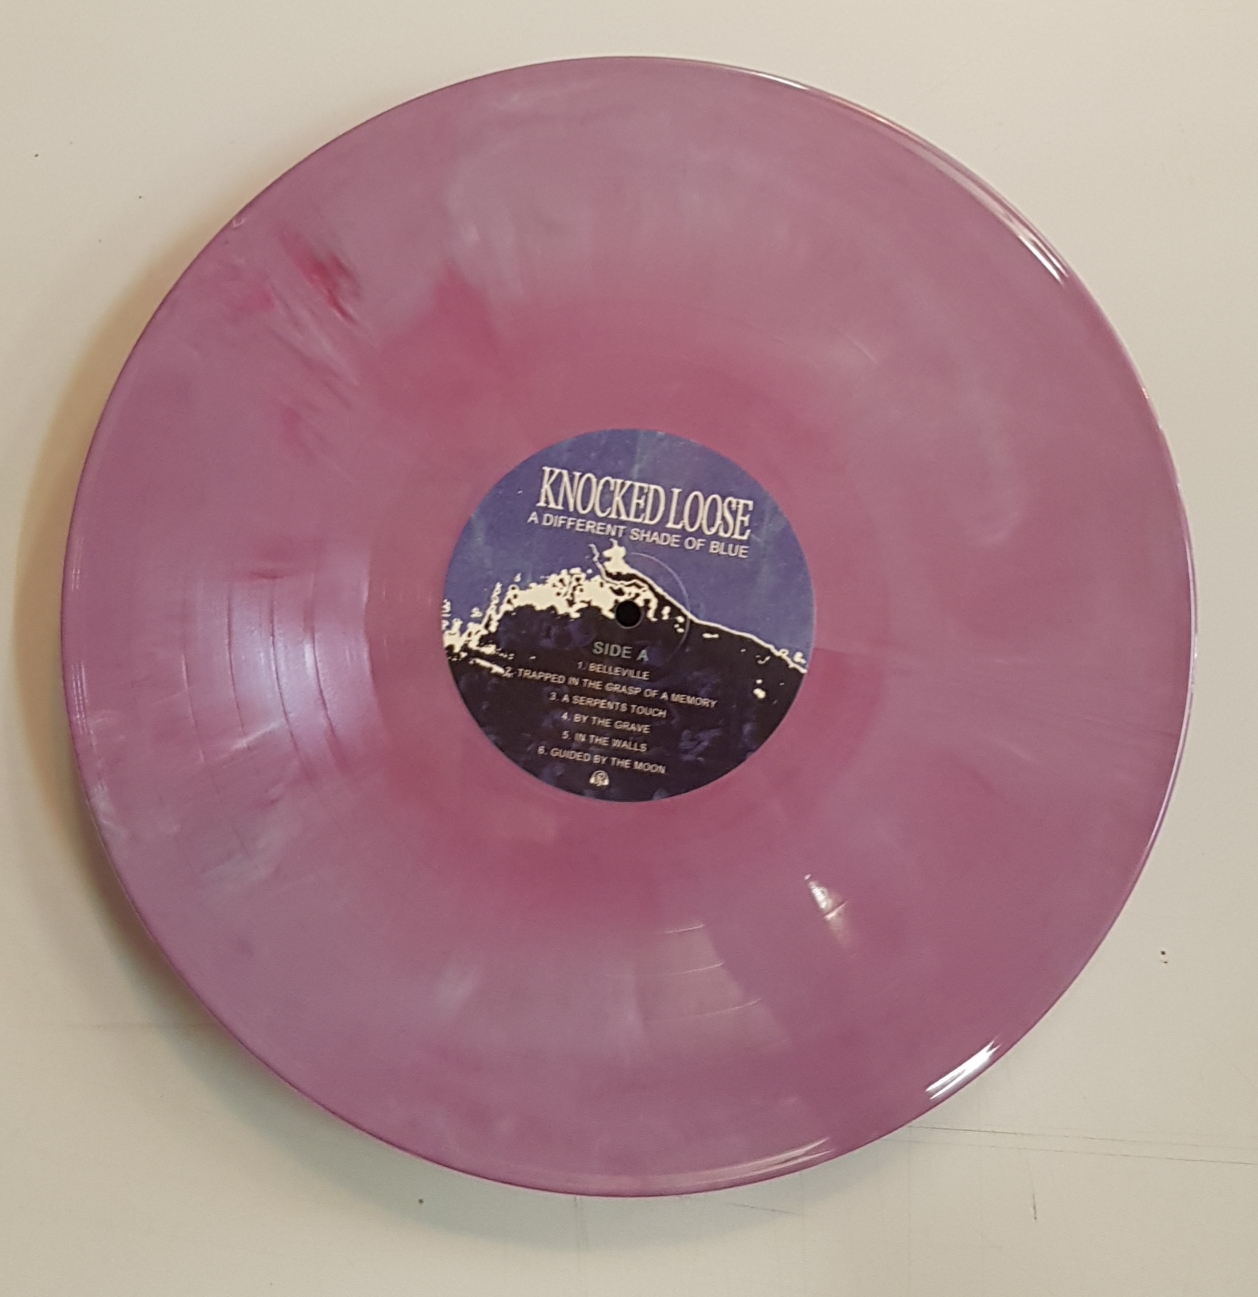 Knocked Loose - A Different Shade Of Blue - colored vinyl